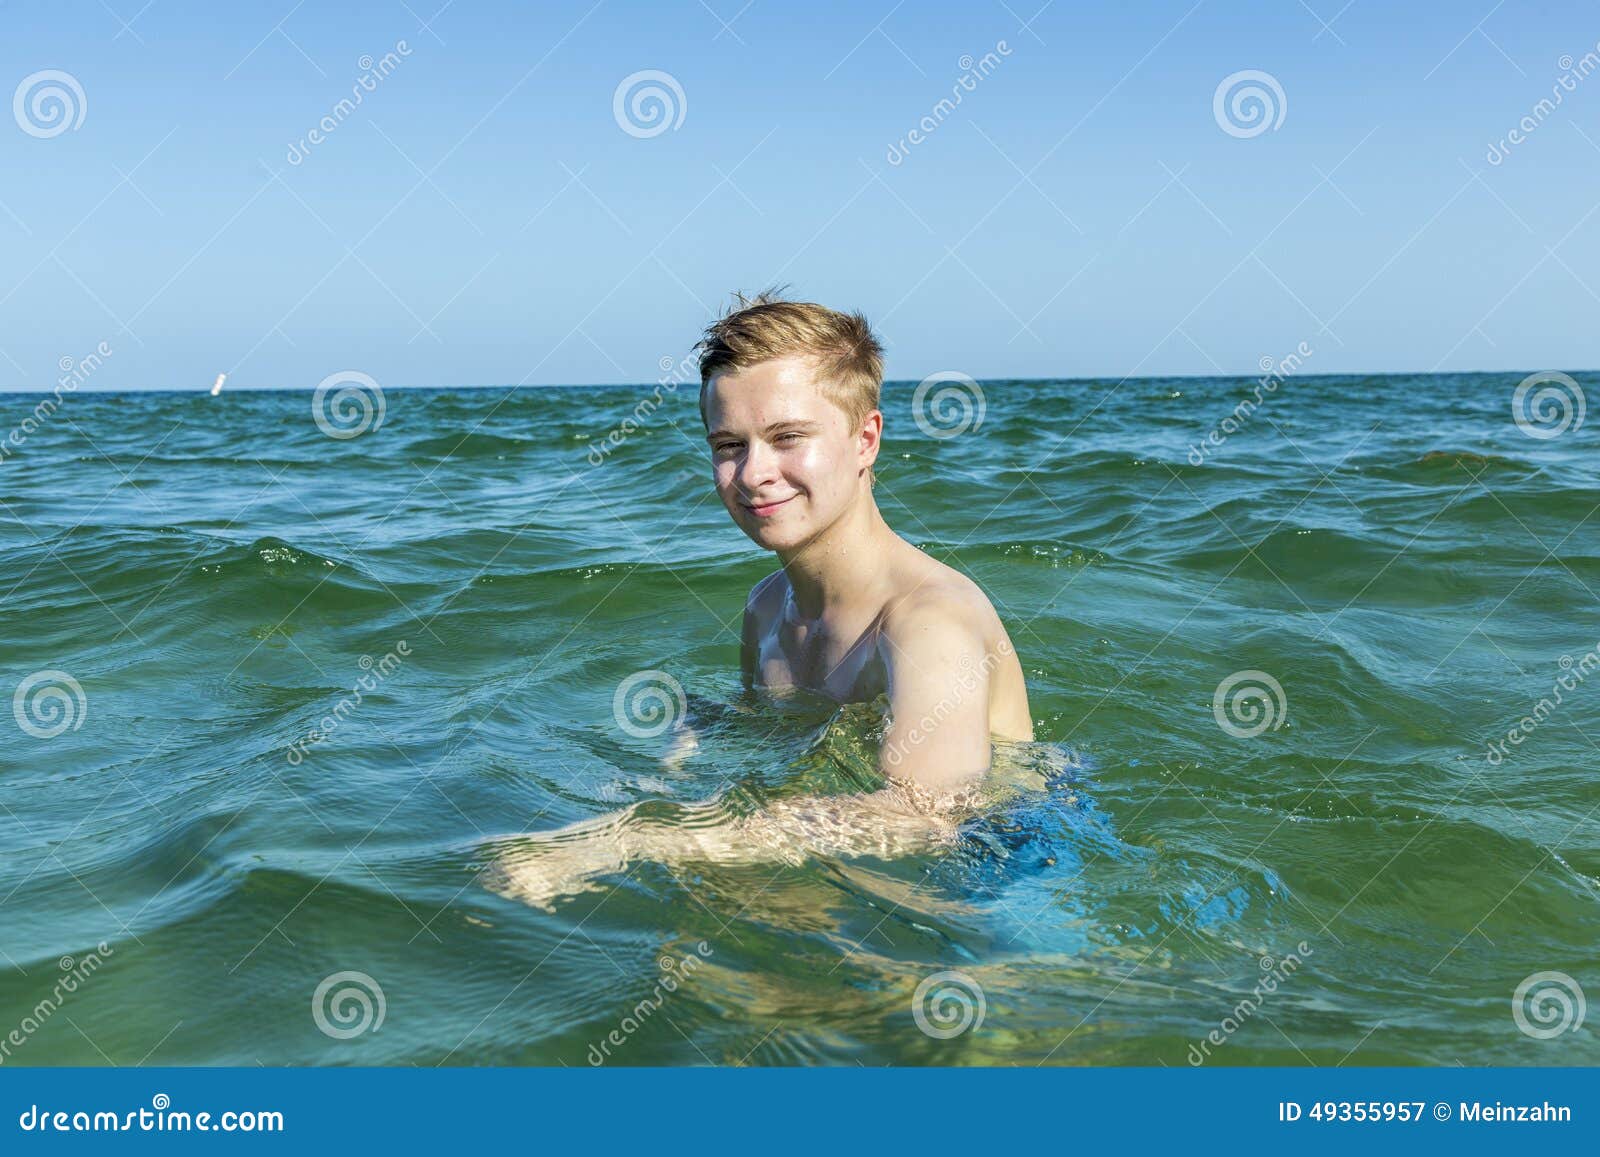 Handsome Teen Has Fun Swimming in the Ocean Stock Image - Image of ...